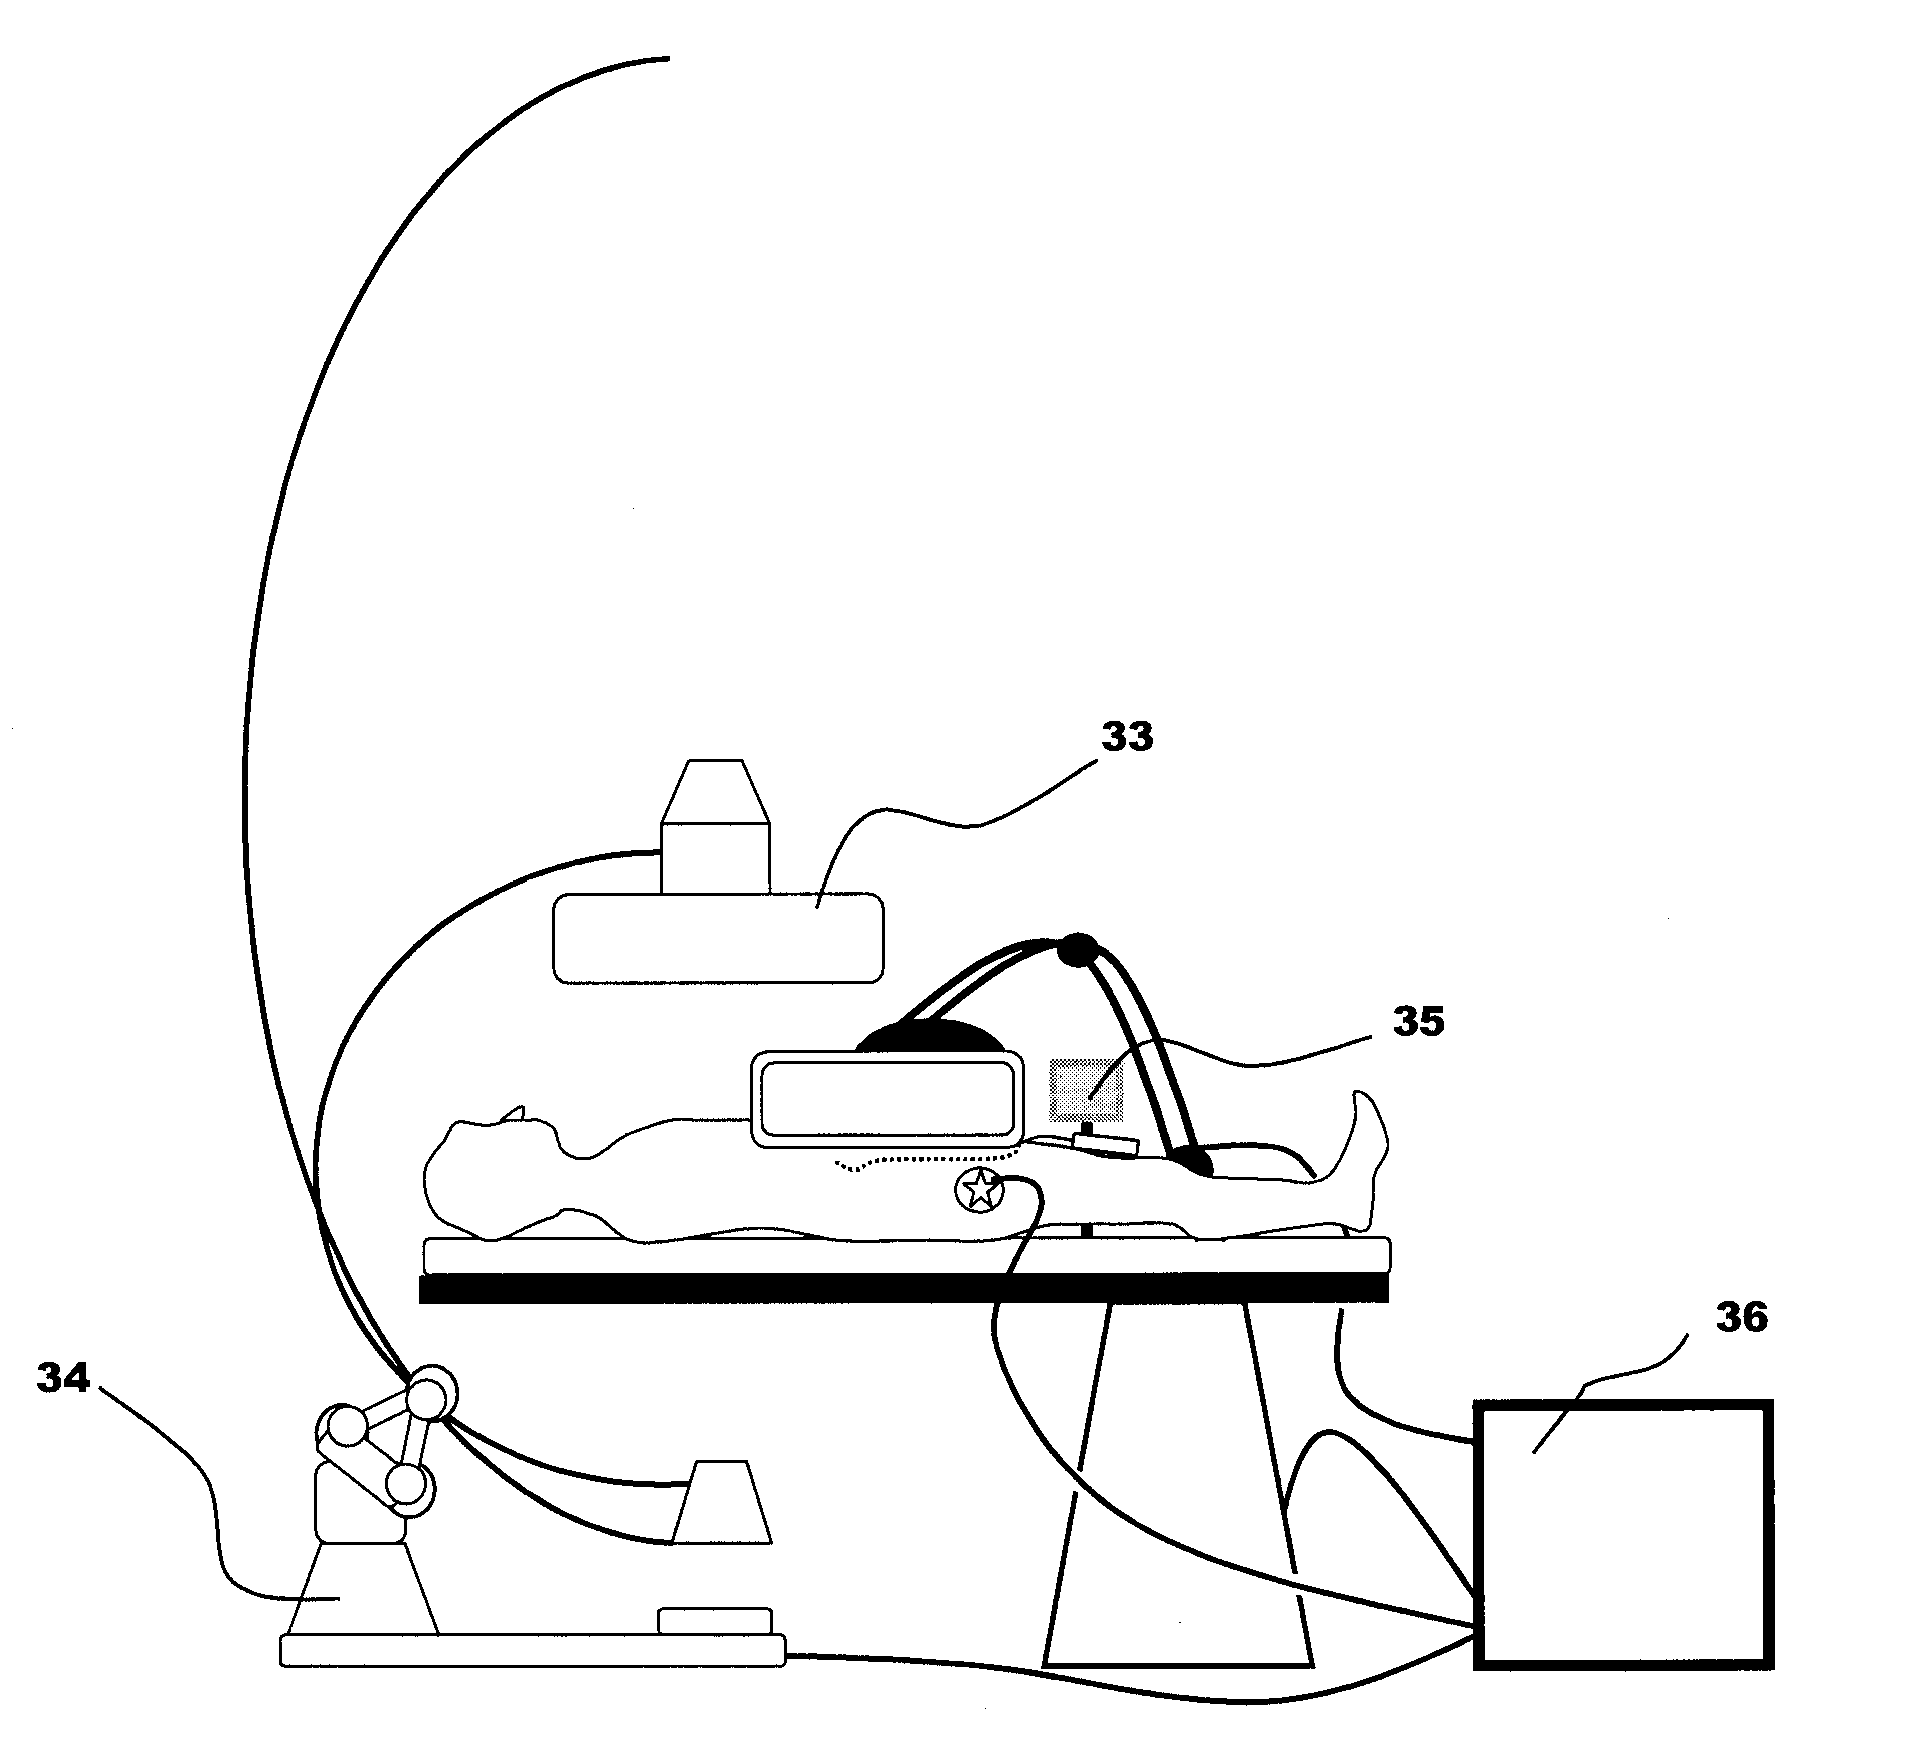 System and method for virtually tracking a surgical tool on a movable display